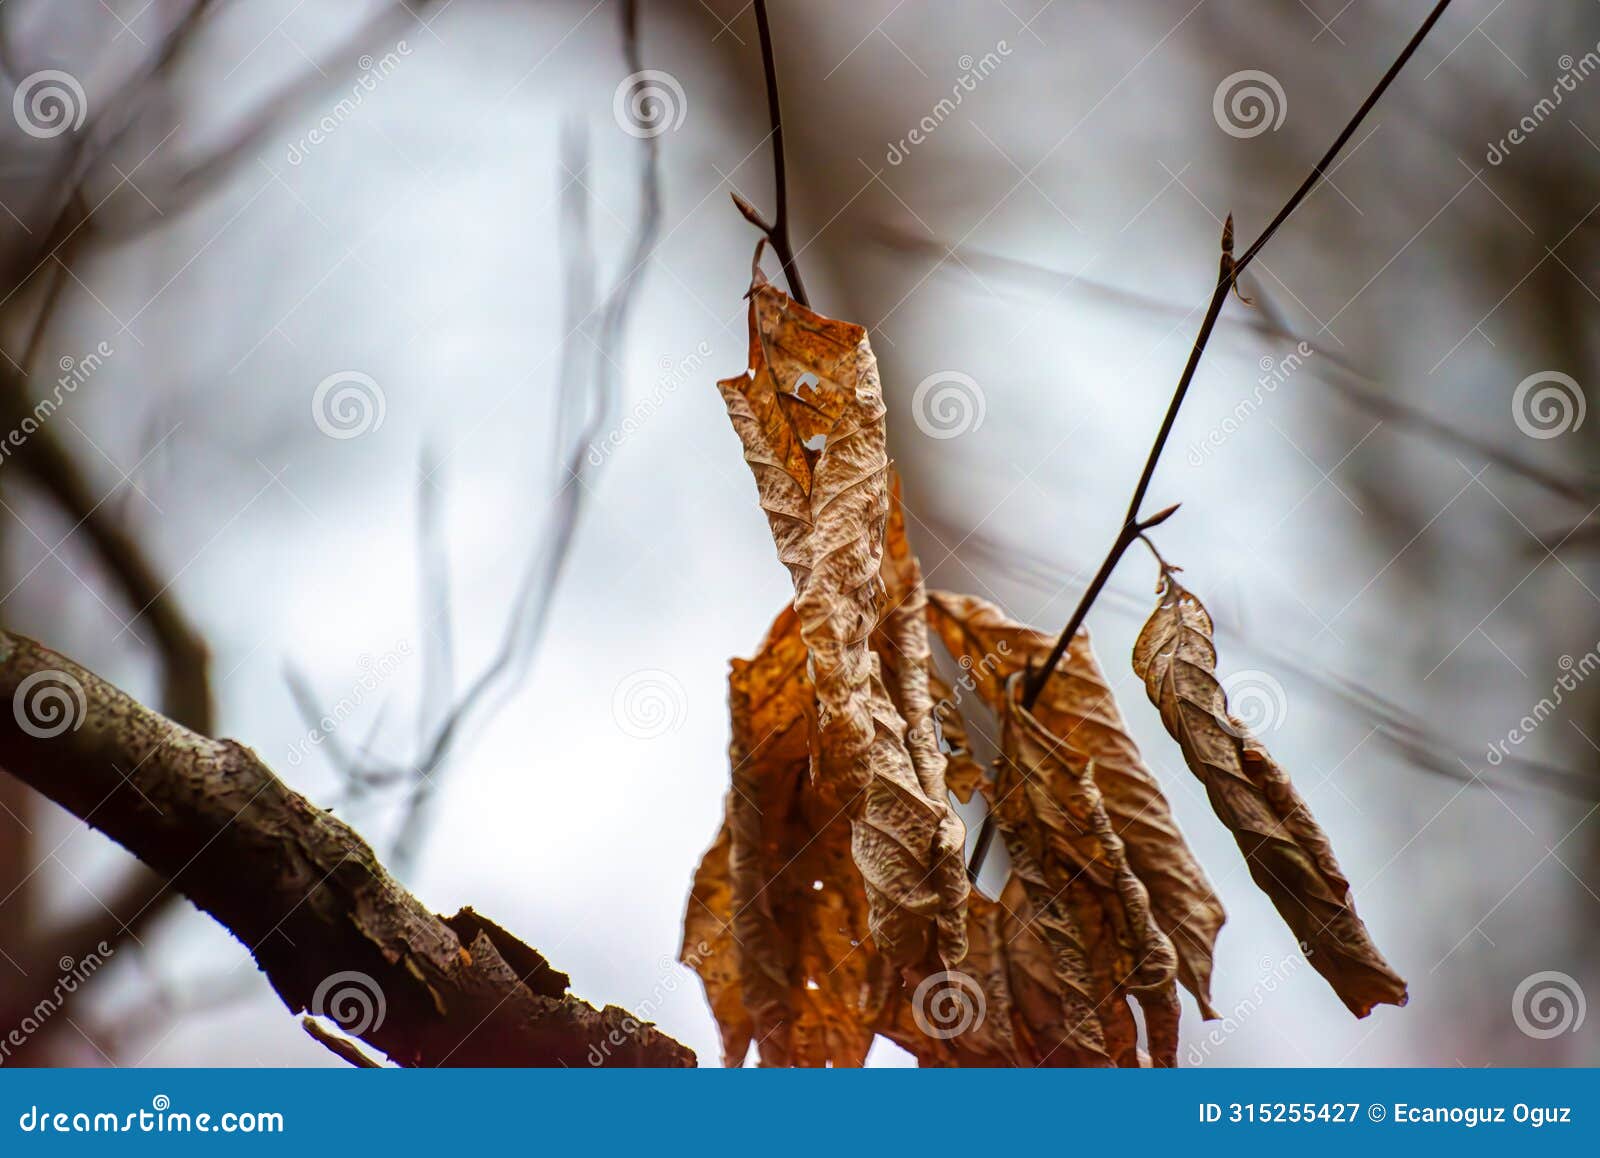 autumn whispers: dry leaves adorn branches